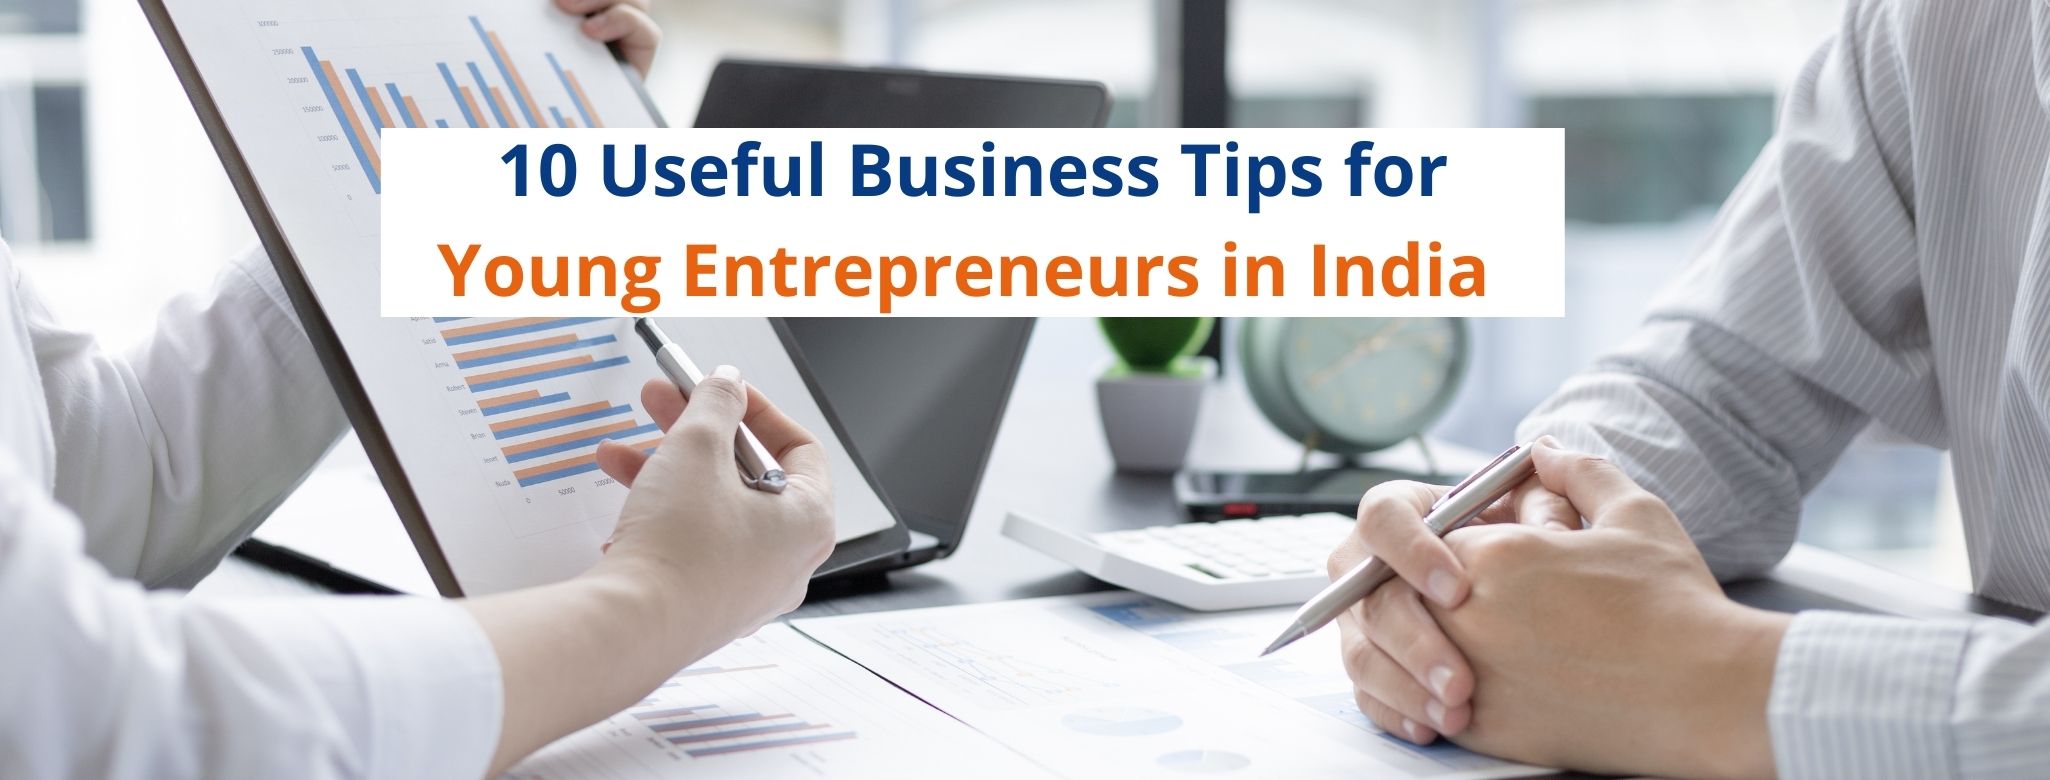 10 Useful Business Tips for Young Entrepreneurs in India 